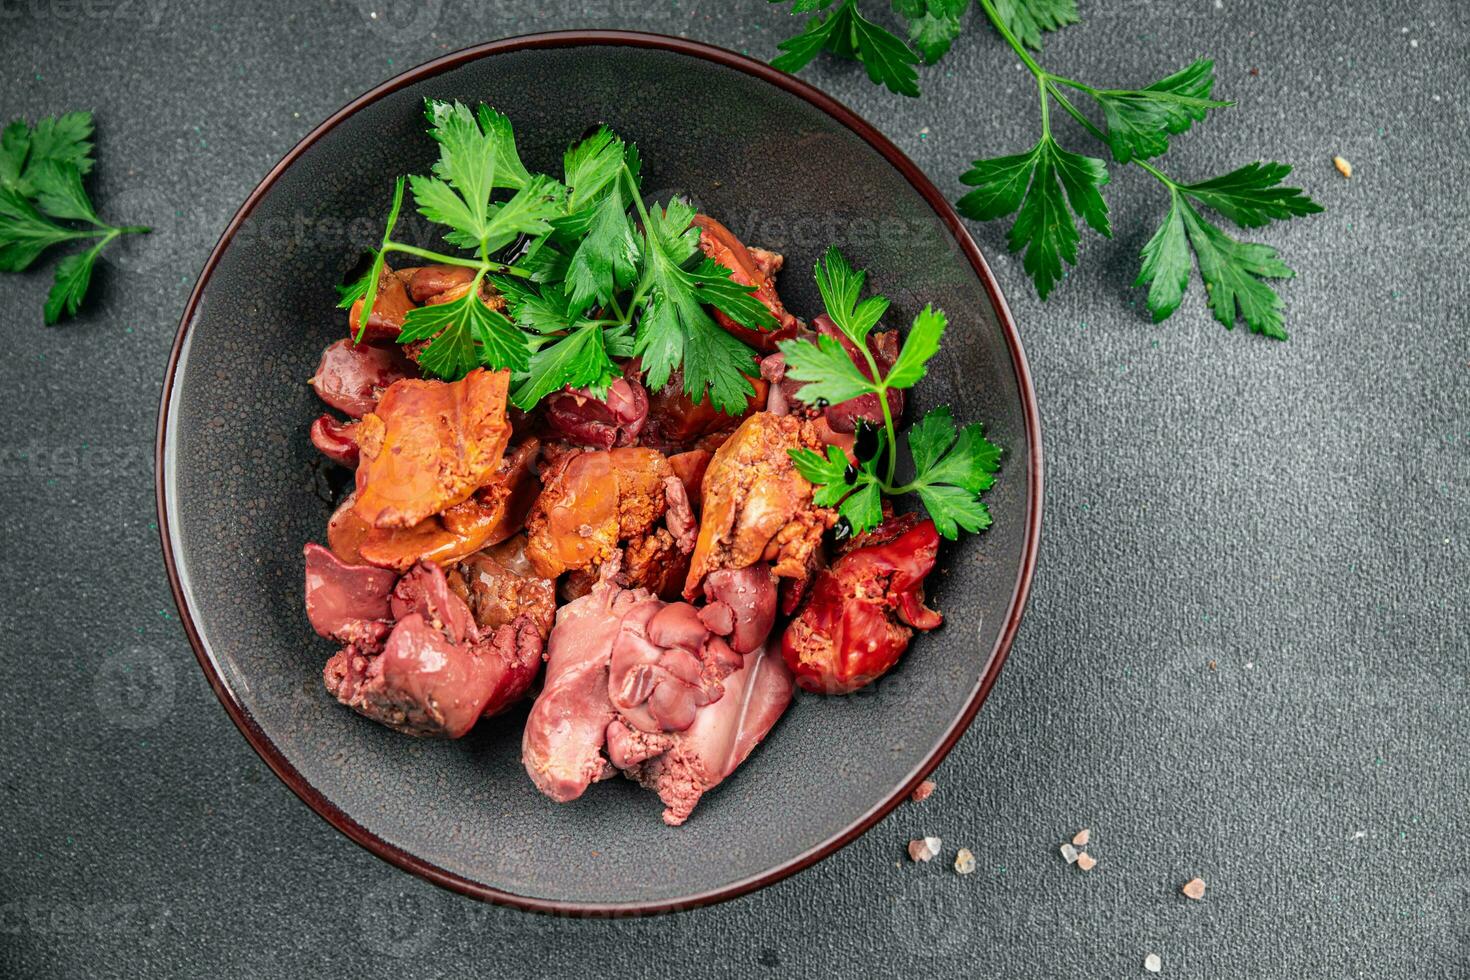 chicken liver confit delicious chicken offal delicious healthy eating cooking appetizer meal food snack on the table copy space photo